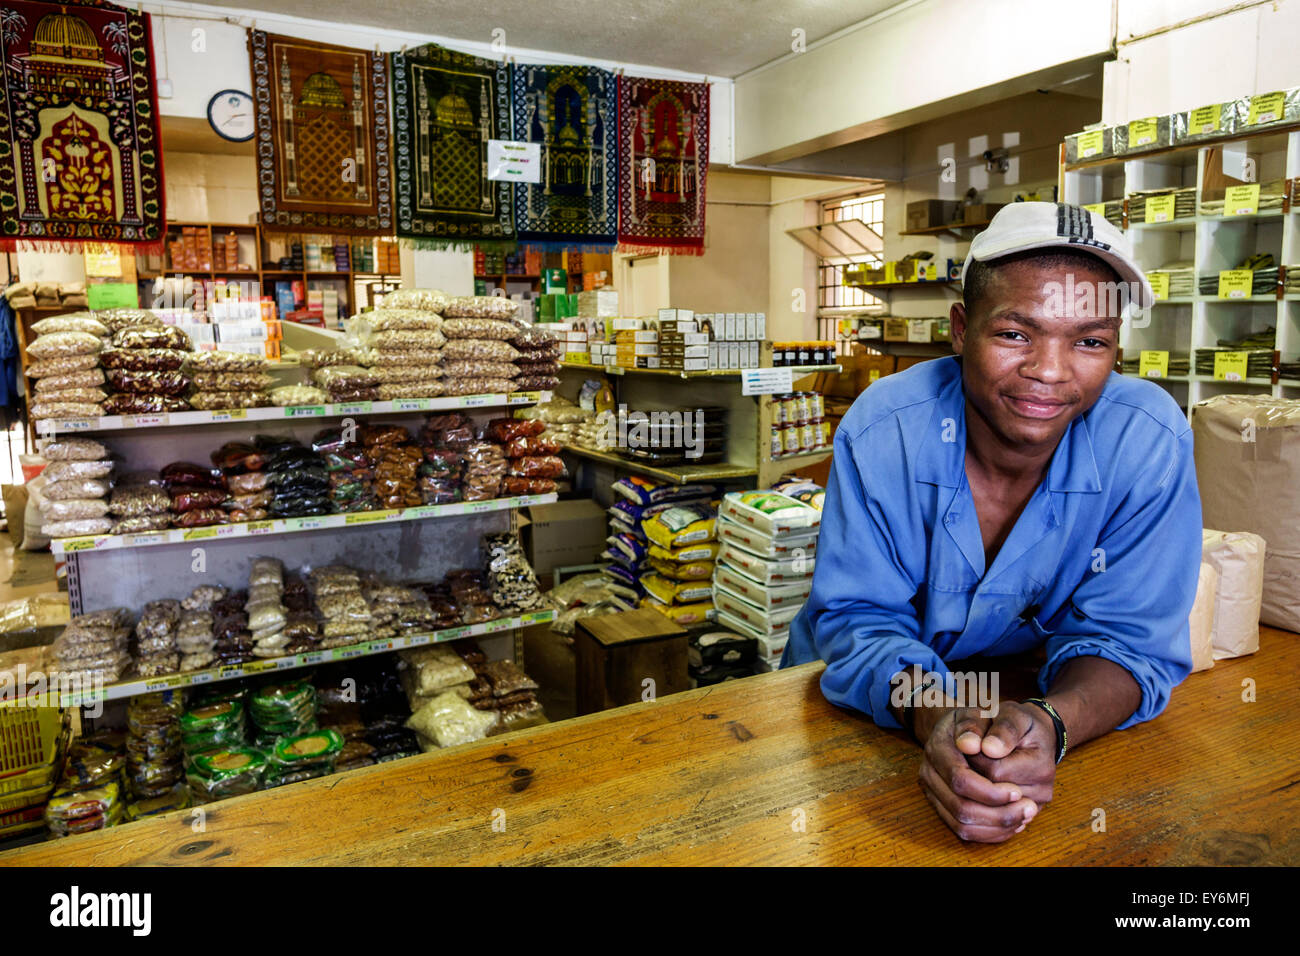 Cape Town South Africa,Bo-Kaap,Schotsche Kloof,Malay Quarter,Wale Street,Muslim,Atlas Trading Company,Indian spice shop,interior inside,counter,Black, Stock Photo